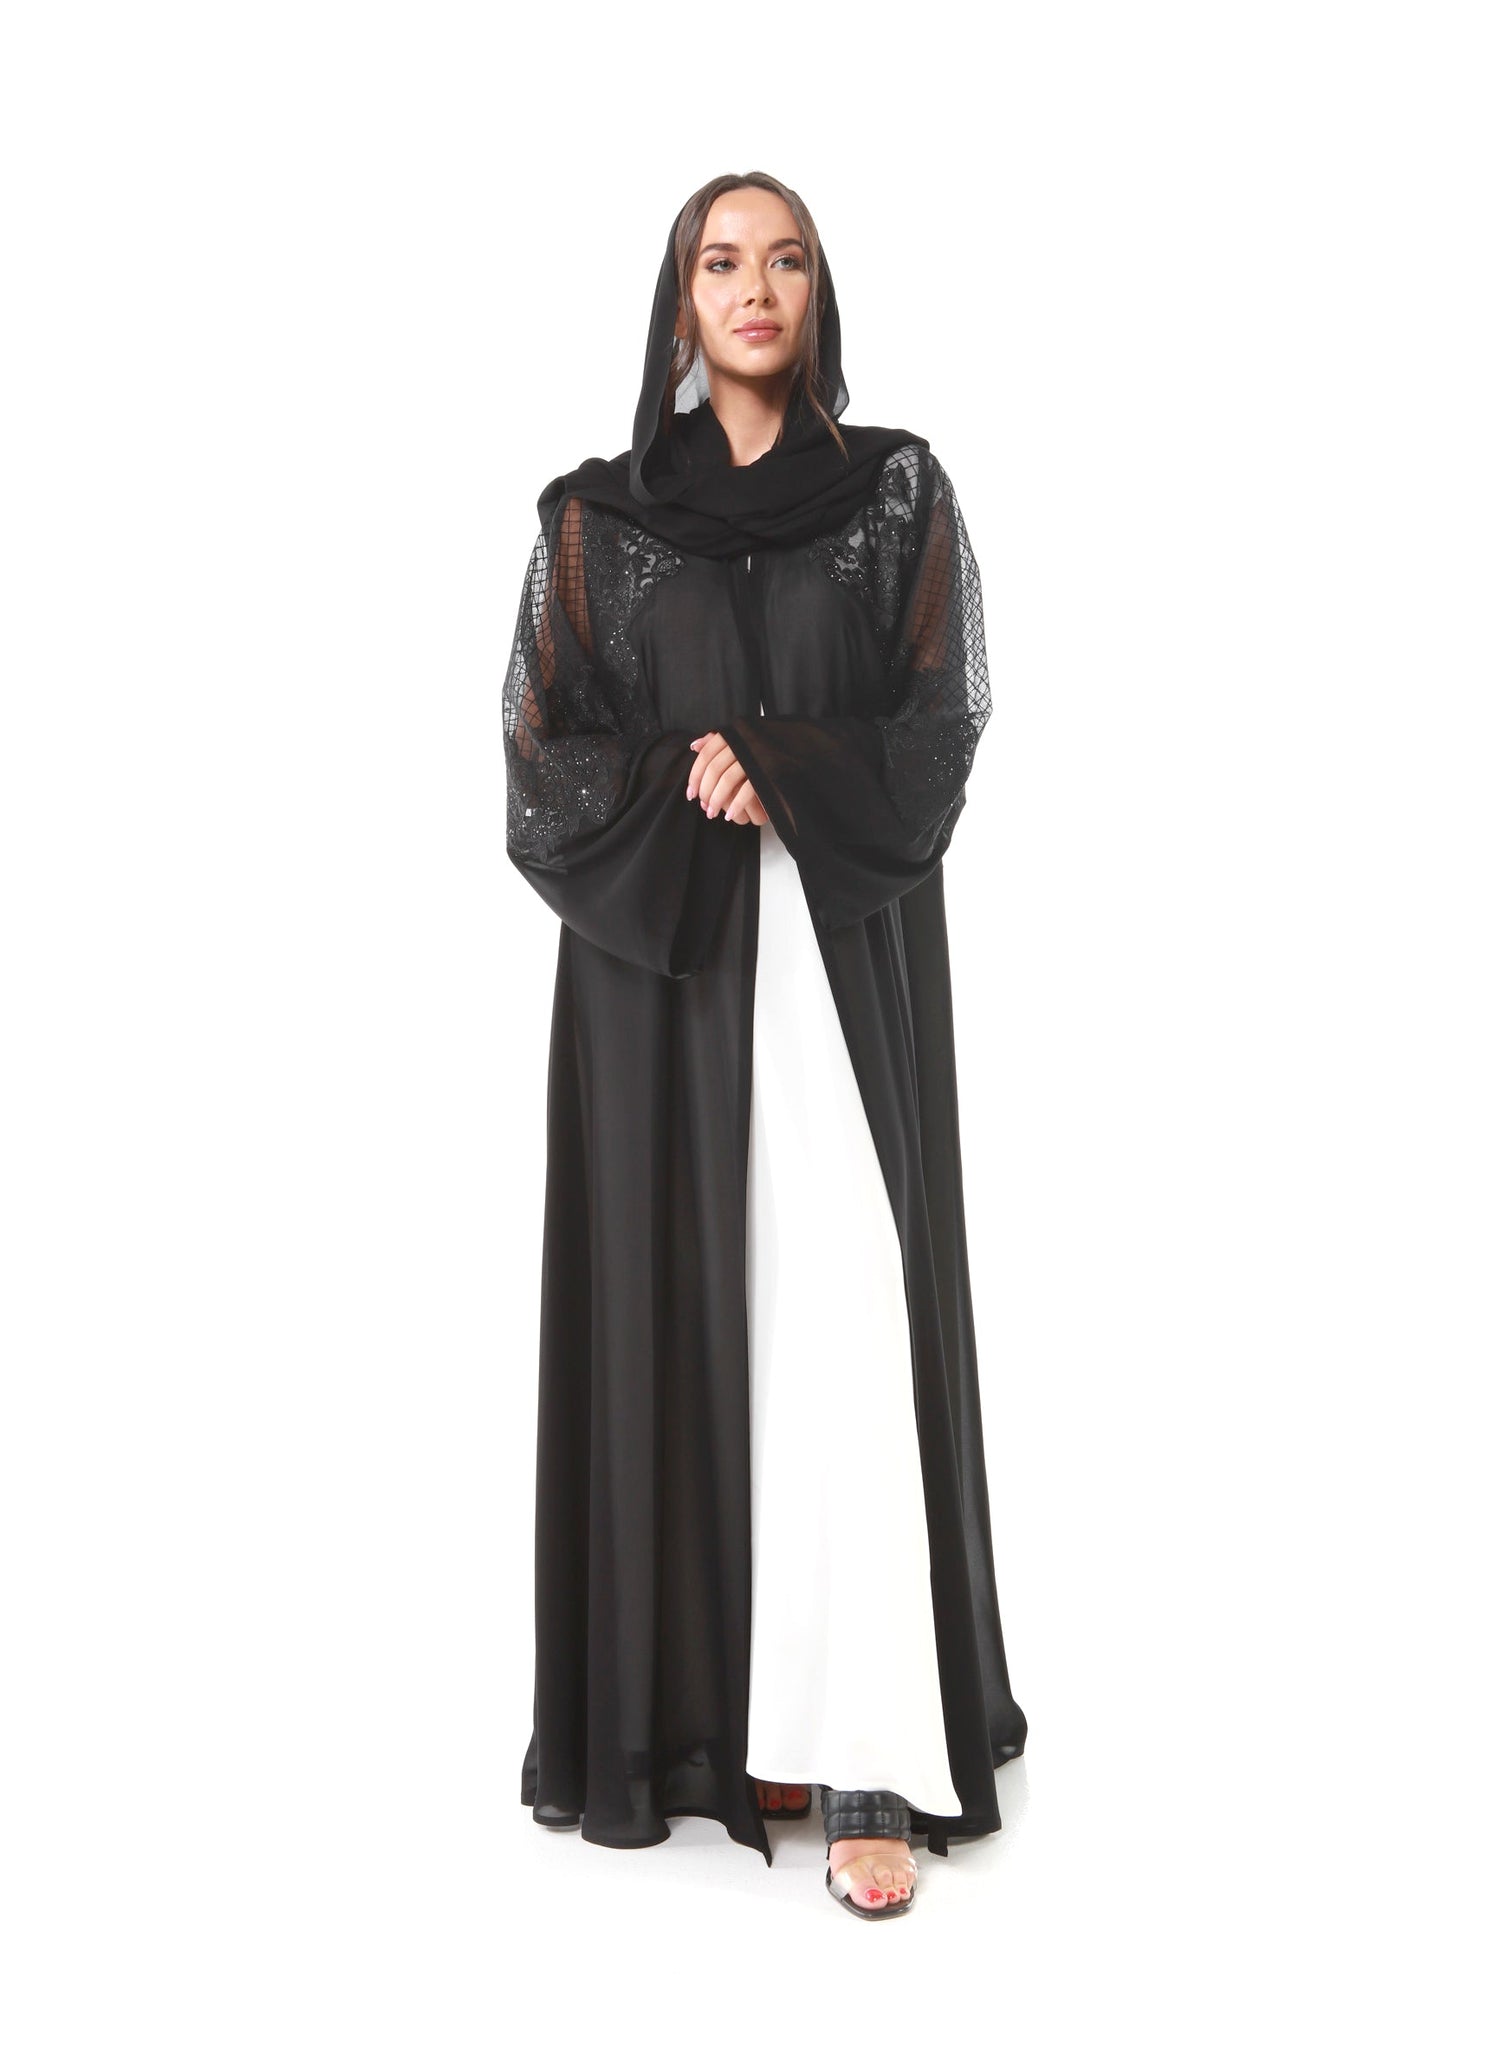 Hanayen Wedding Chiffon Abaya with French lace and detailed tulle embroidery highlighted by Crystals